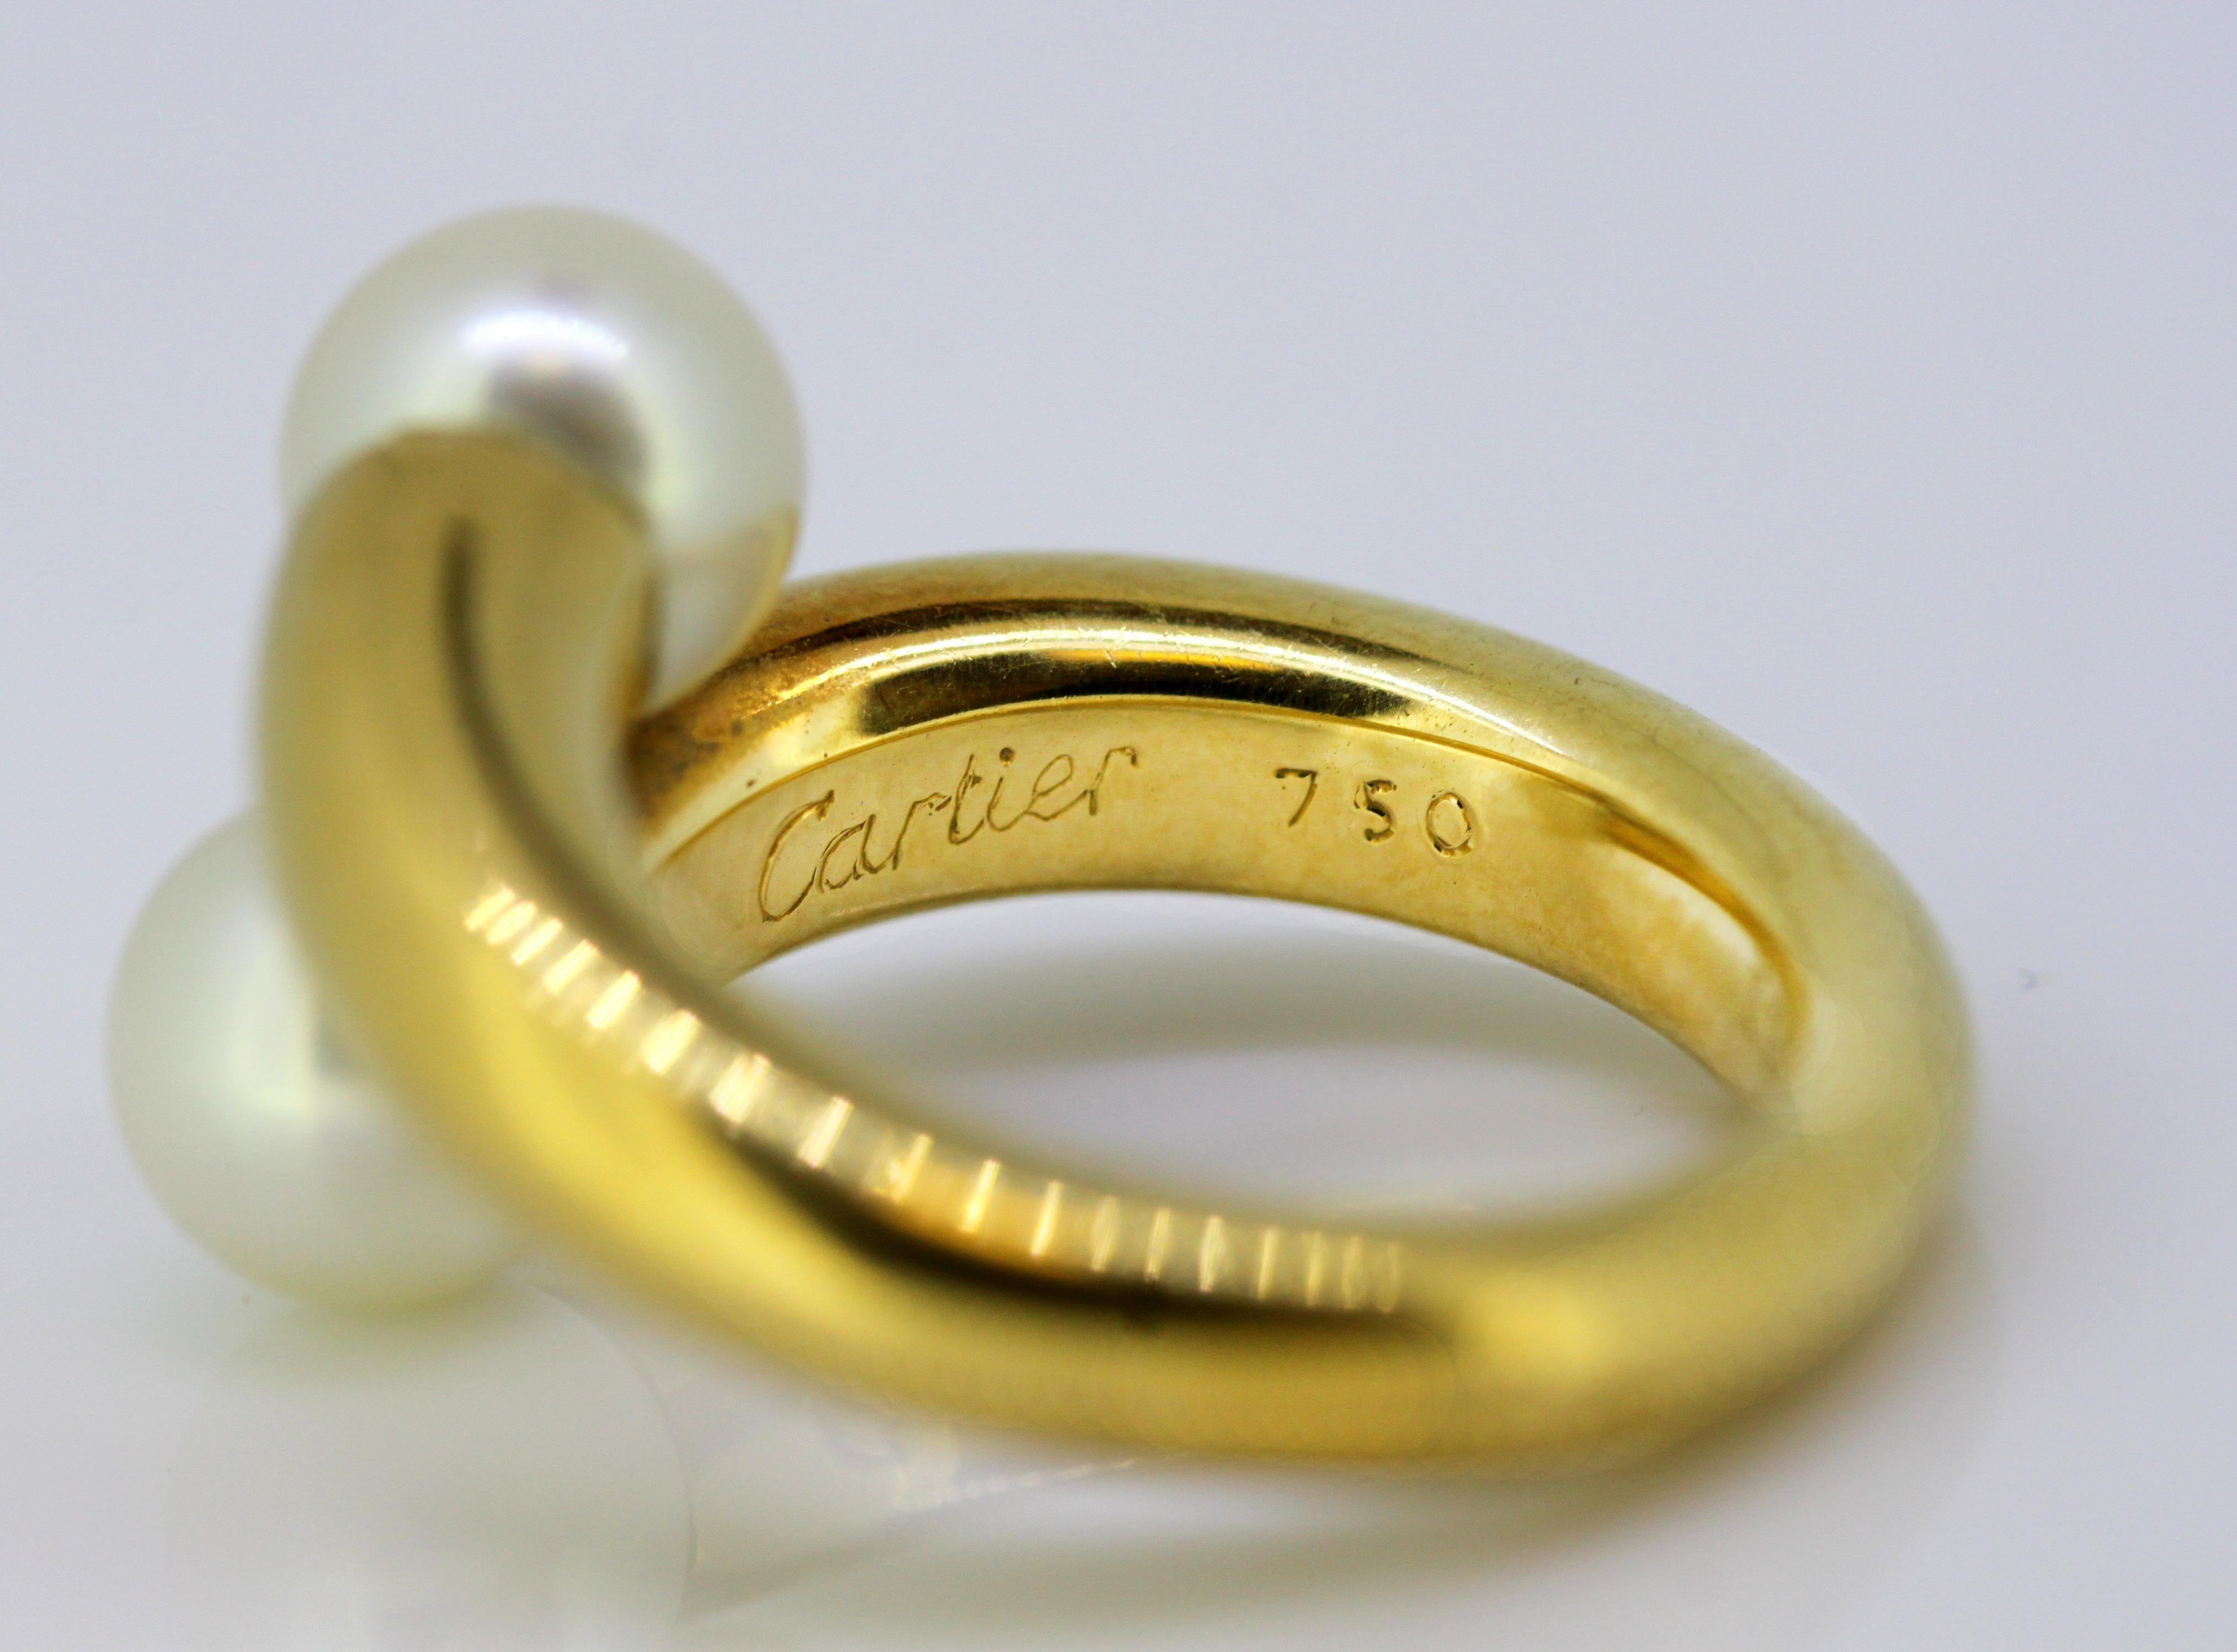 Cartier, 18 Karat Gold Ladies Ring with Two Natural Freshwater Pearls 4